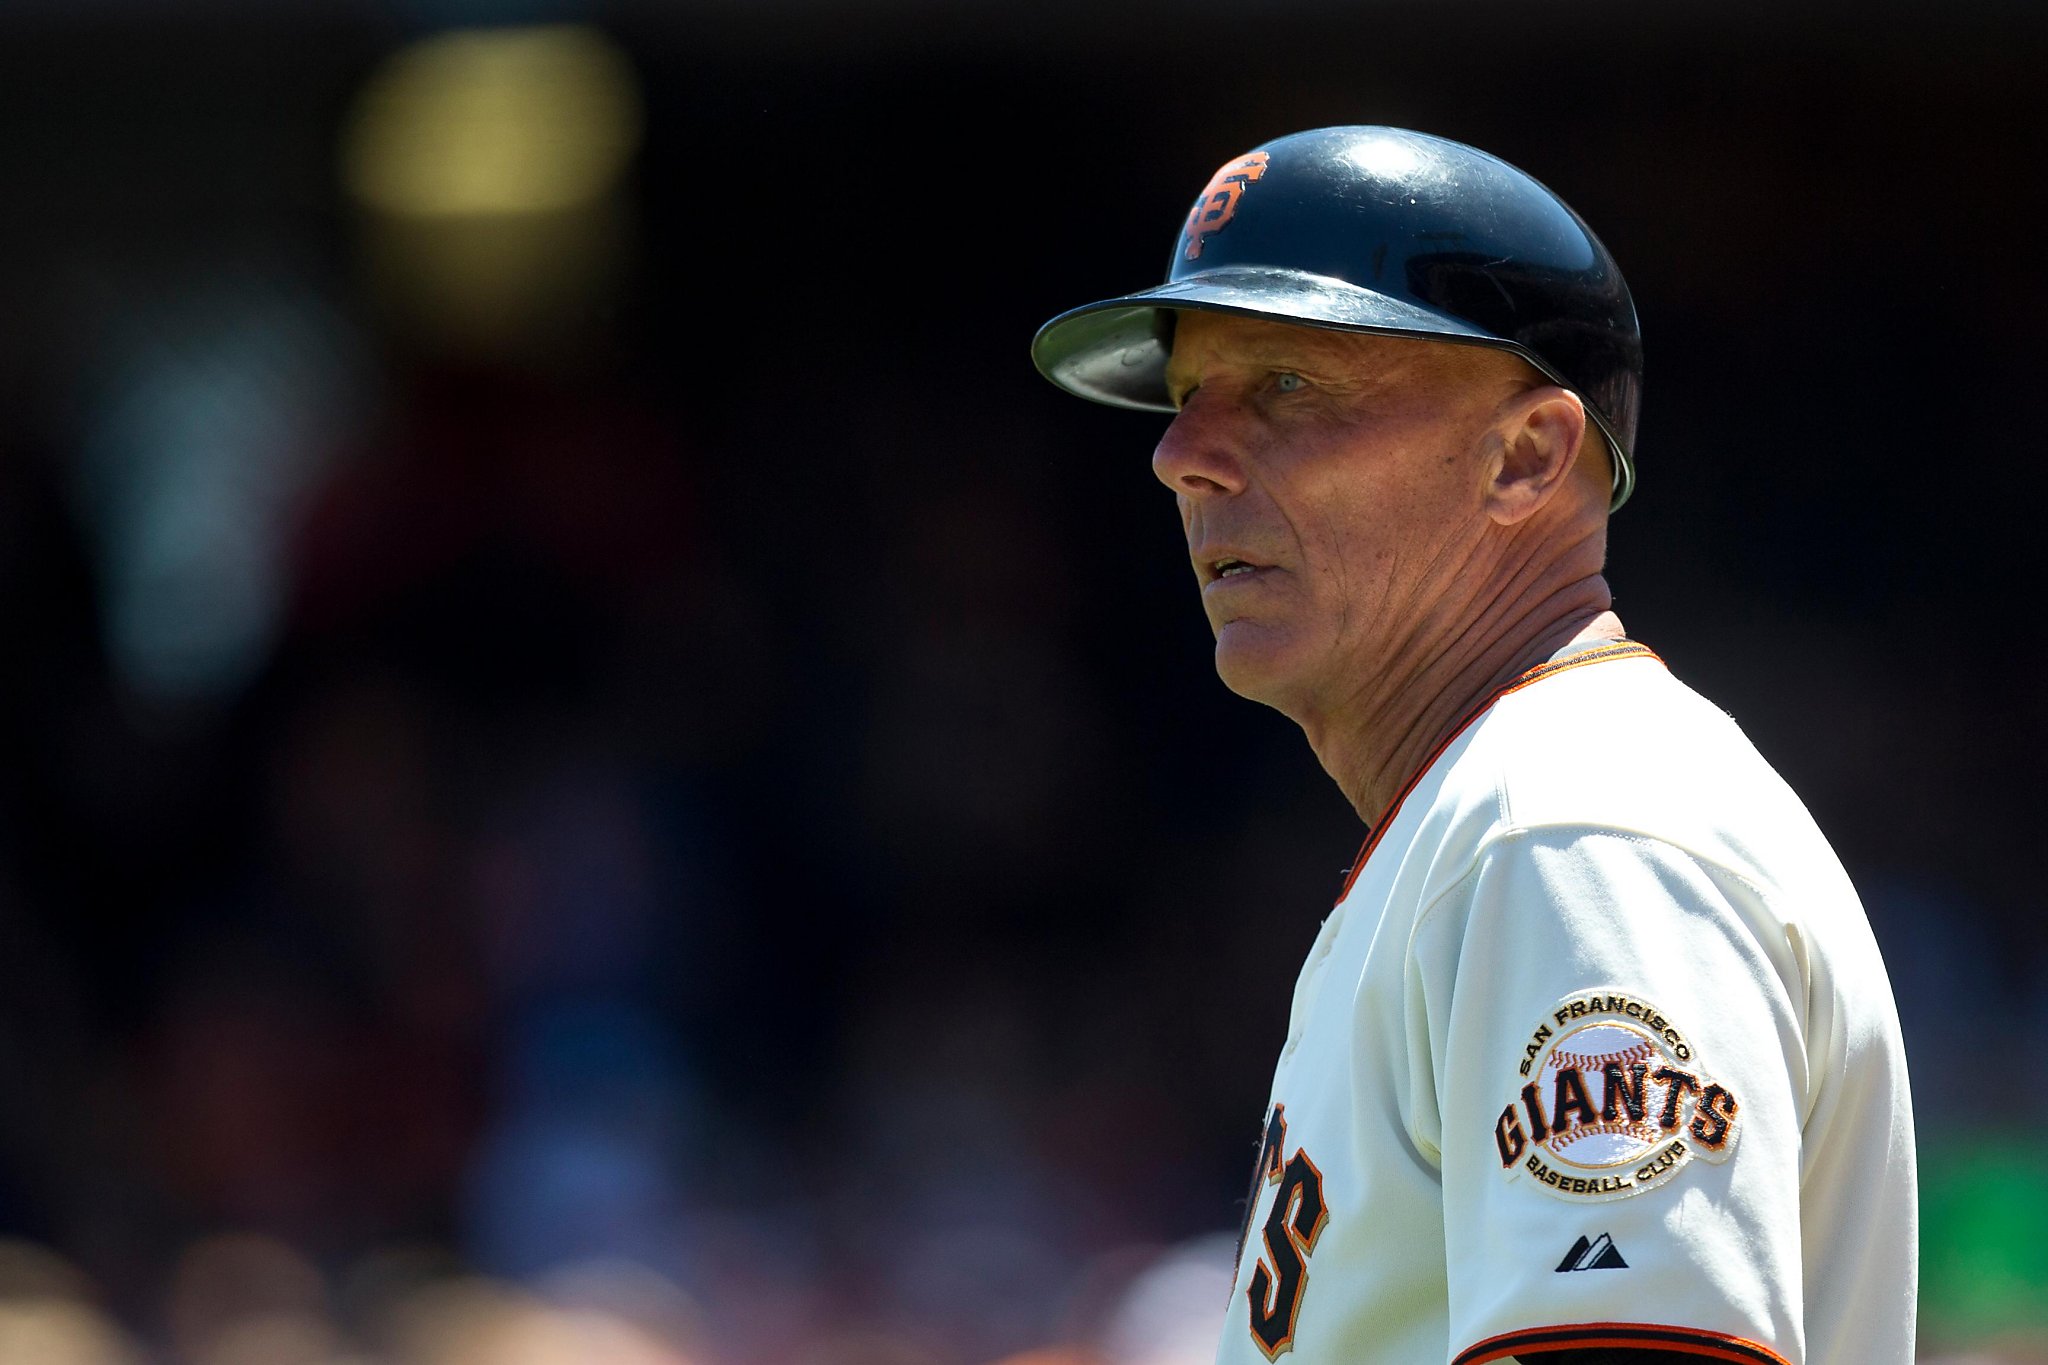 Former Giants coach Tim Flannery discharged from second hospital stay